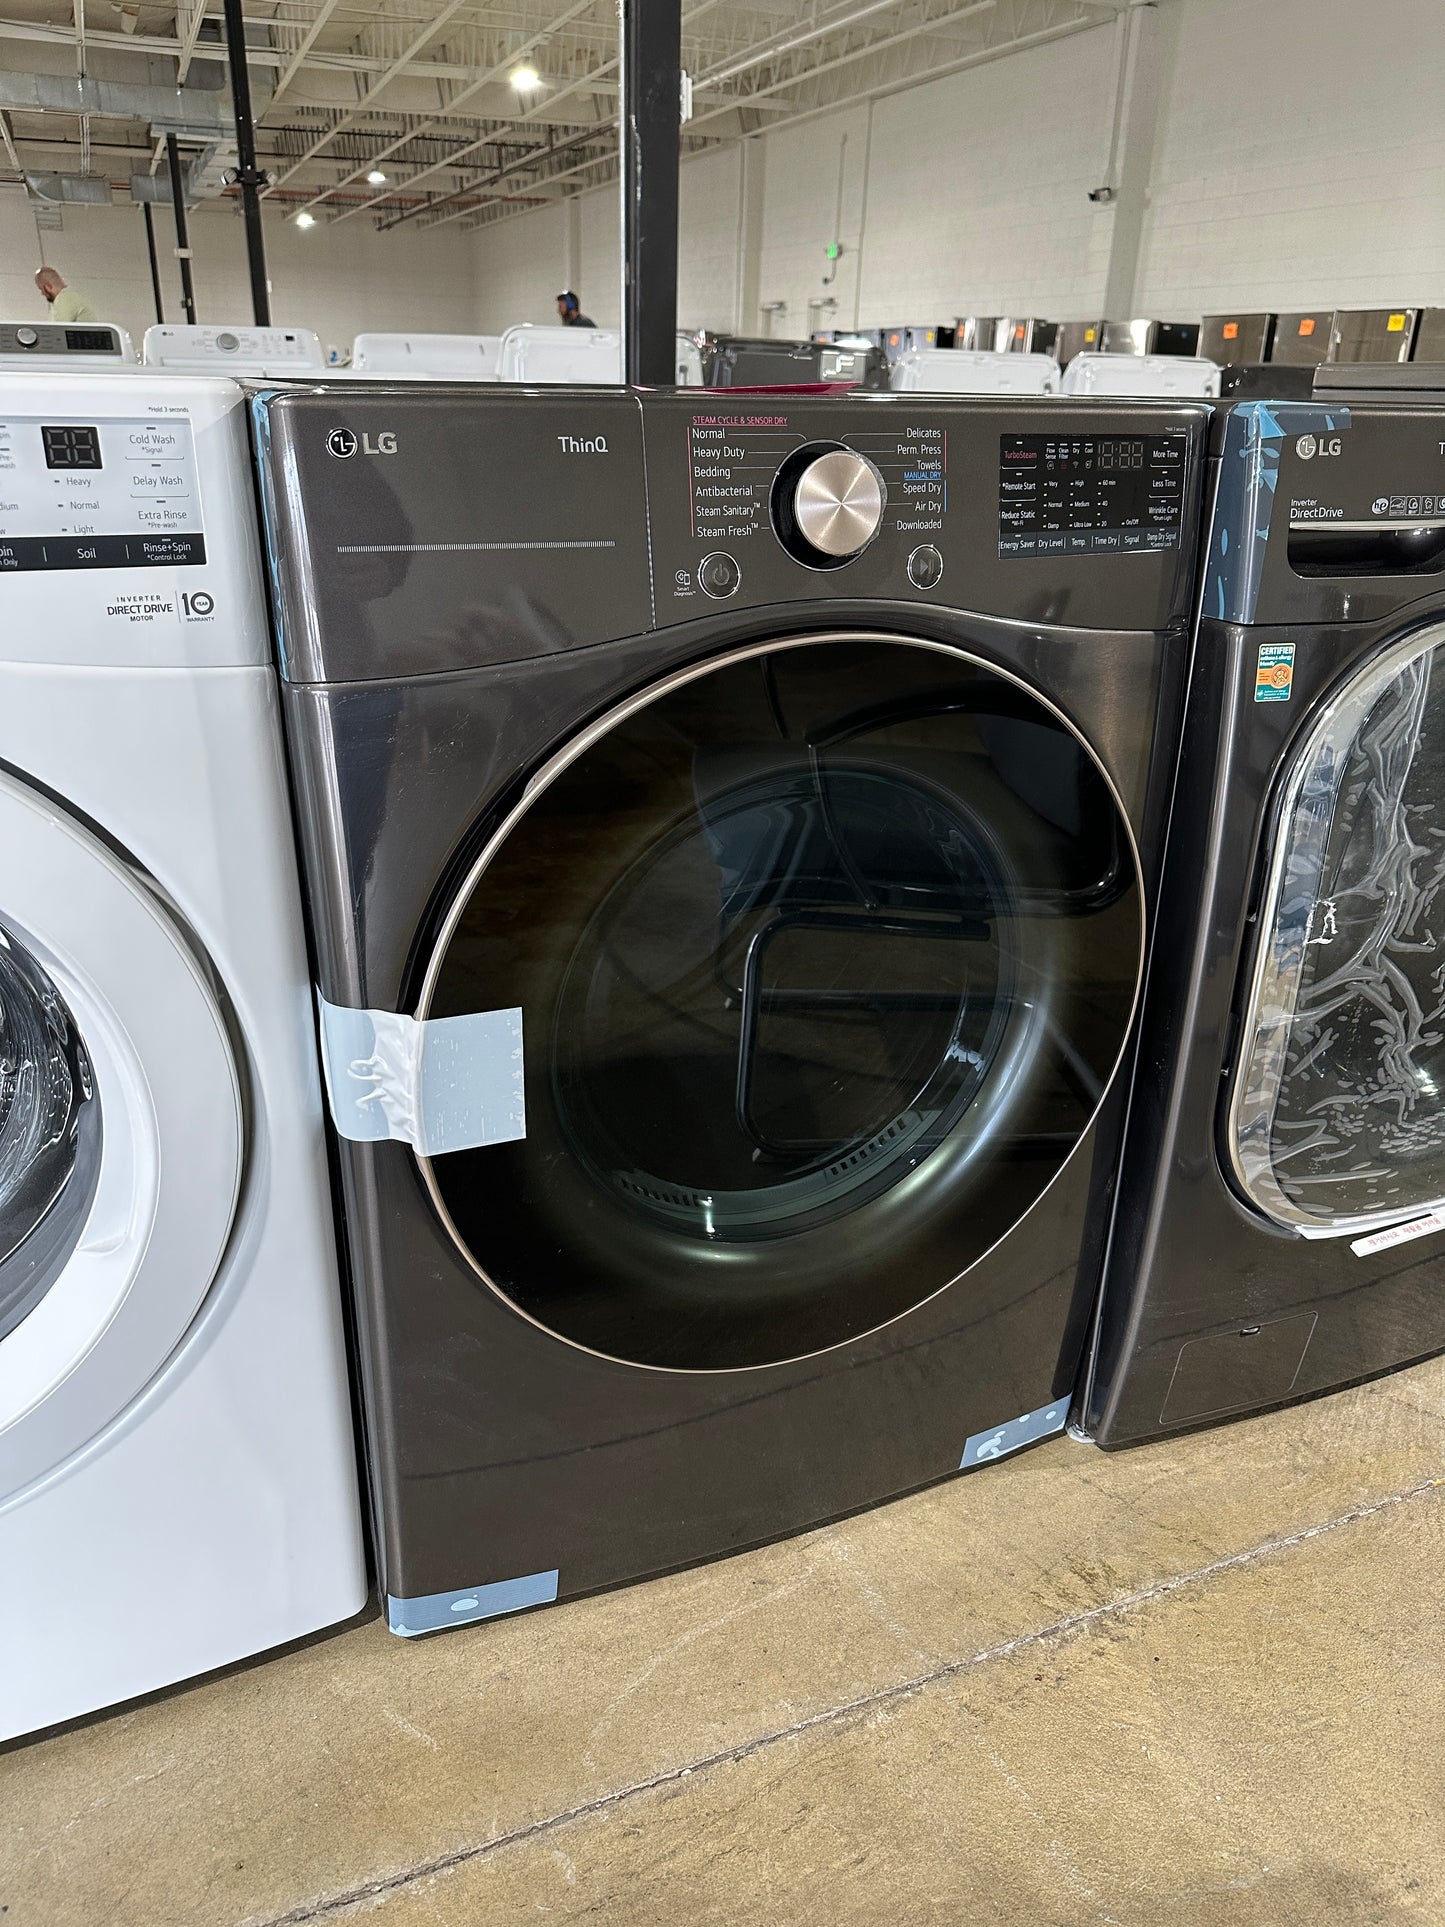 NEWLY DISCOUNTED NEW LG ELECTRIC DRYER WITH FULL WARRANTY - DRY11647S DLEX4000B